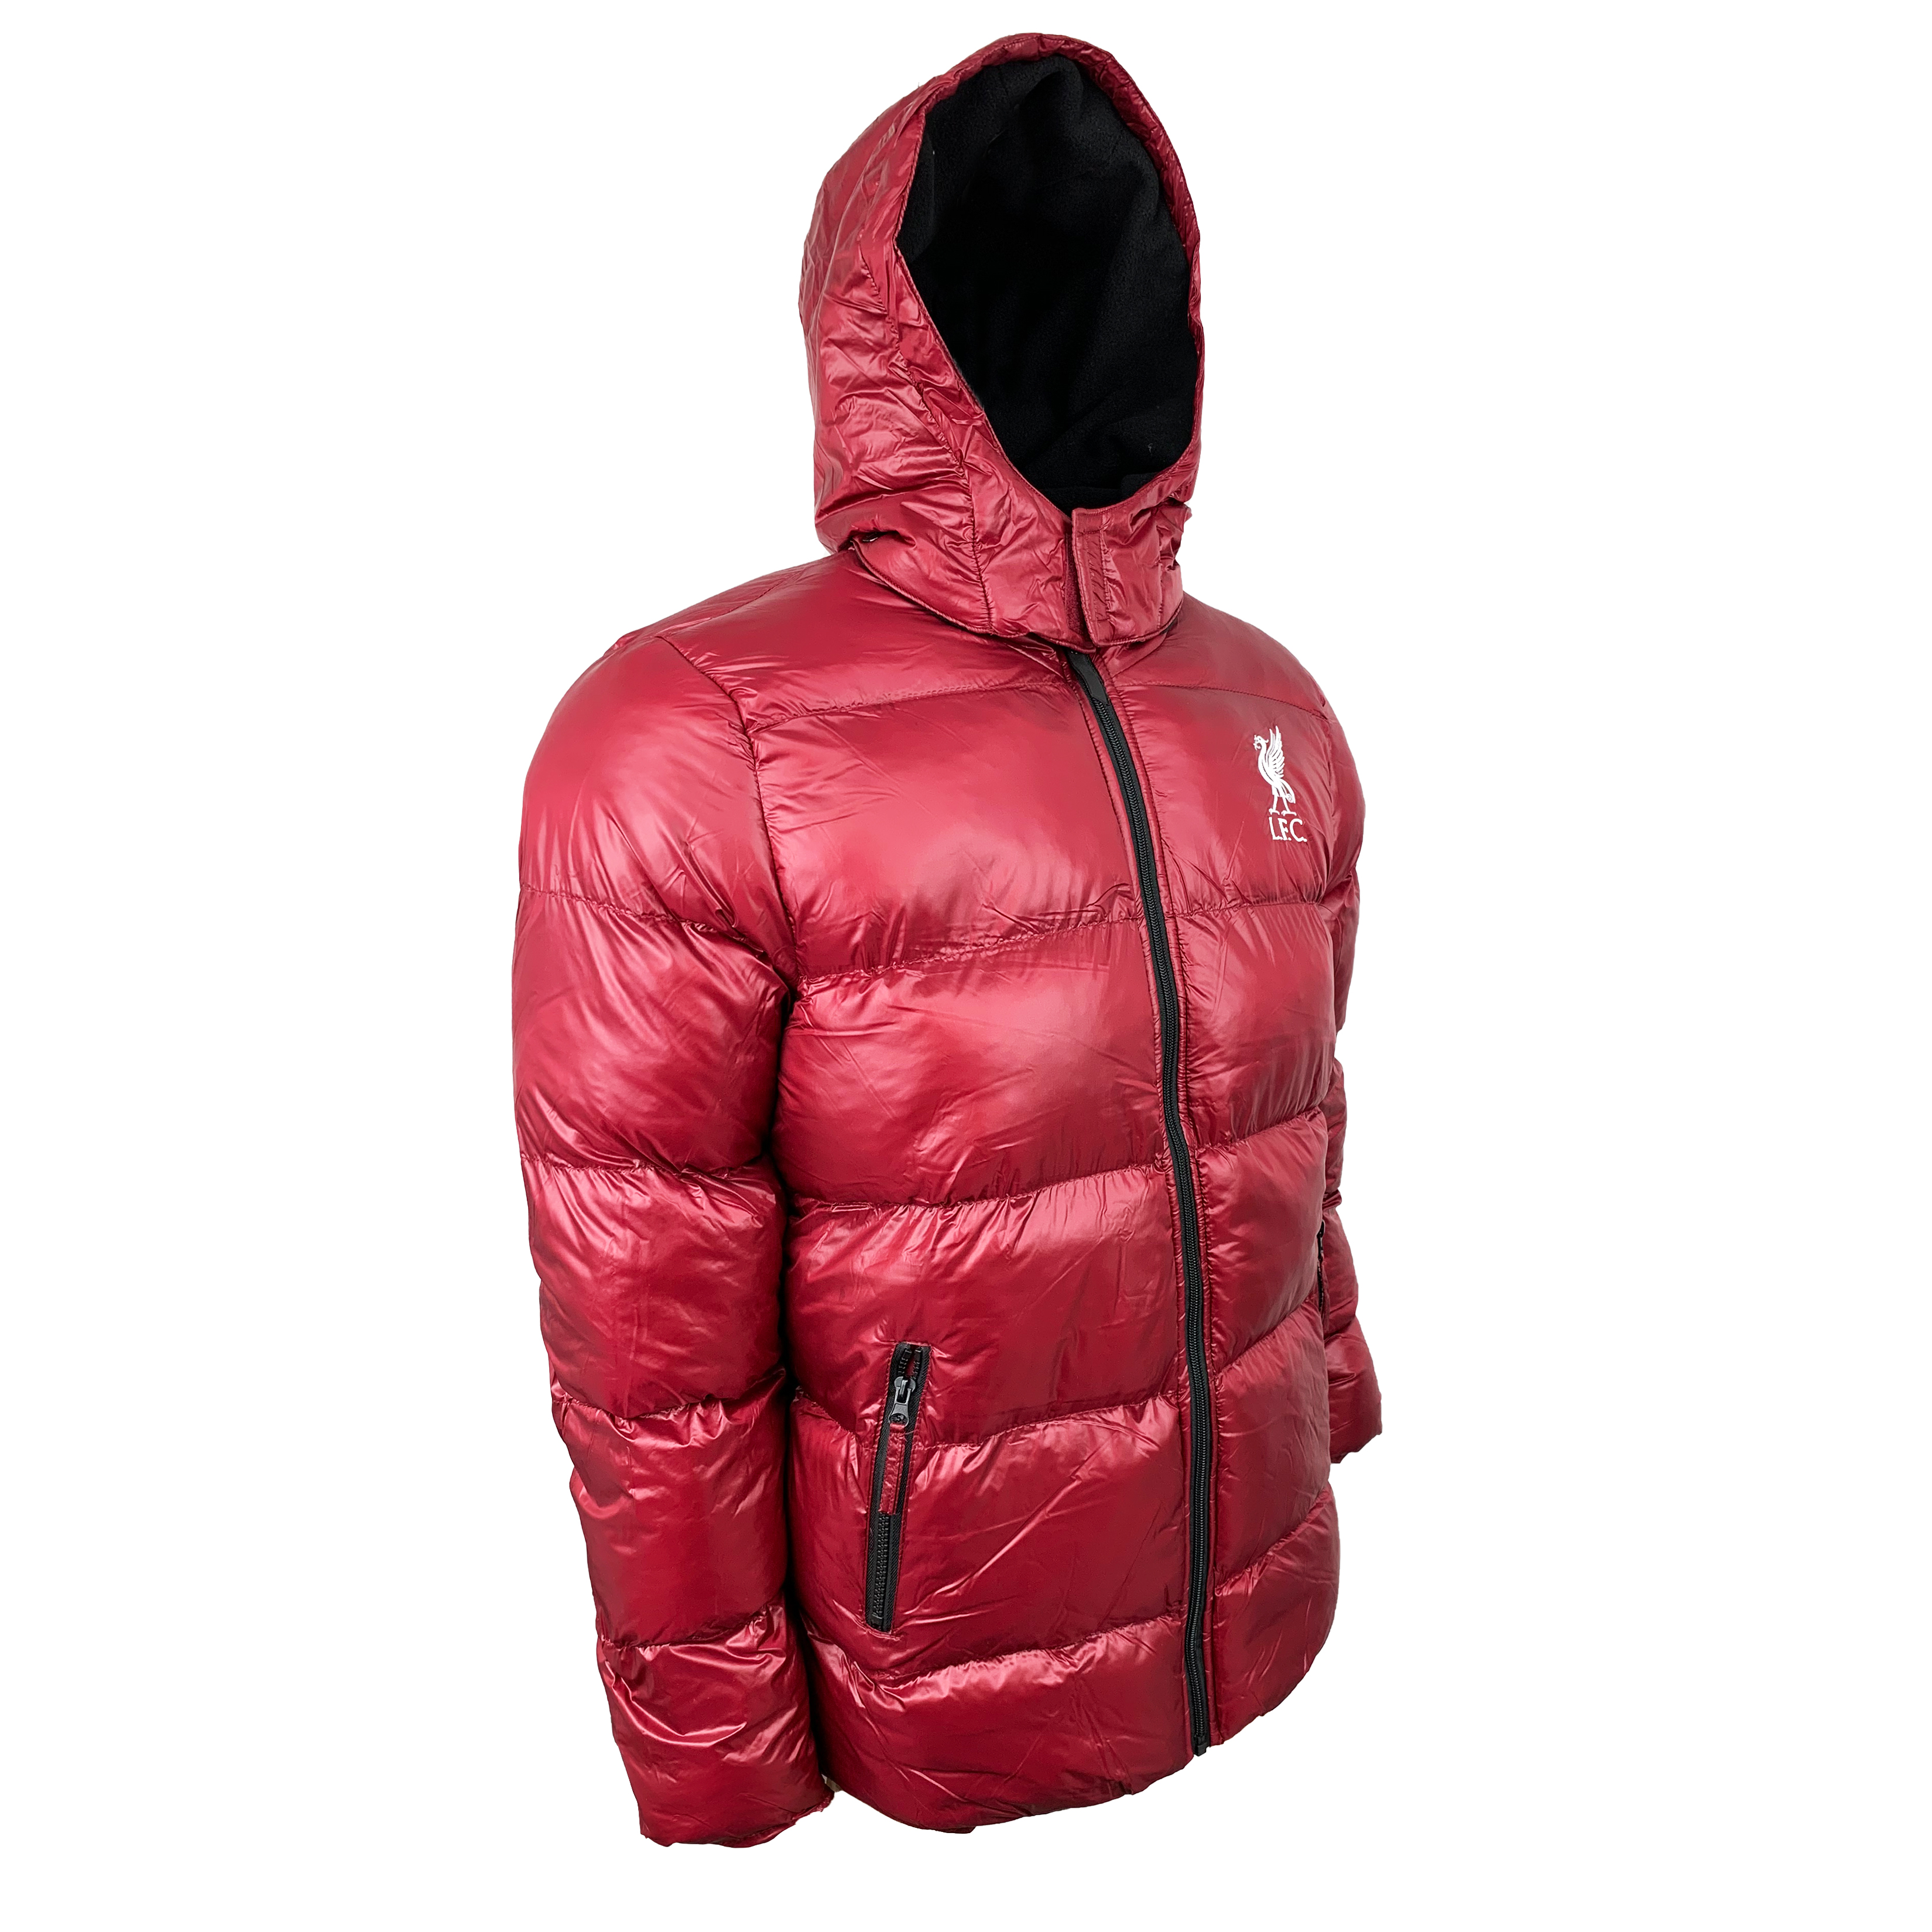 Liverpool Winter Jacket, With Removable Hood, Licensed Liverpool Puffer Jacket (YM) - image 2 of 4